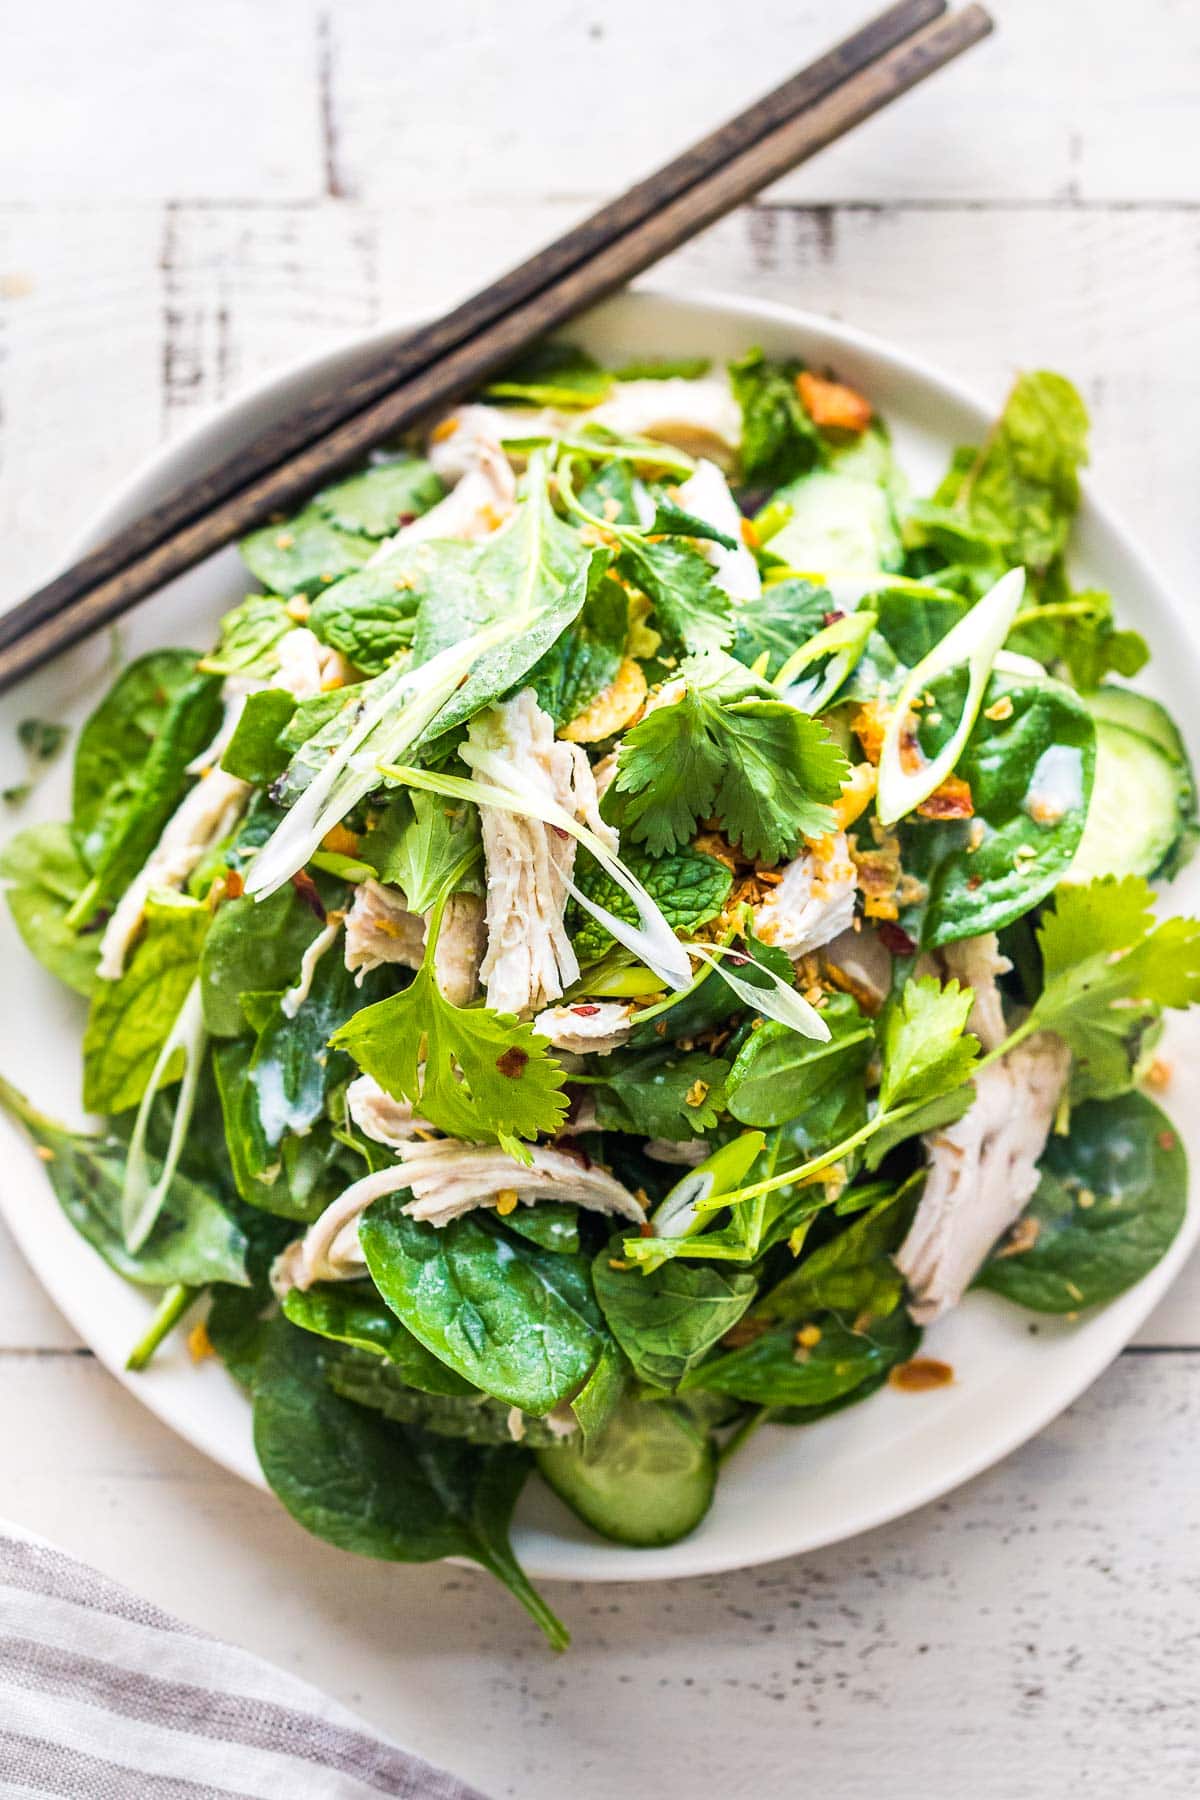 A tasty recipe for Thai Chicken Salad with baby spinach, cucumber, mint, cilantro, and scallions with crispy shallots. A flavorful entree salad perfect for warm summer nights.